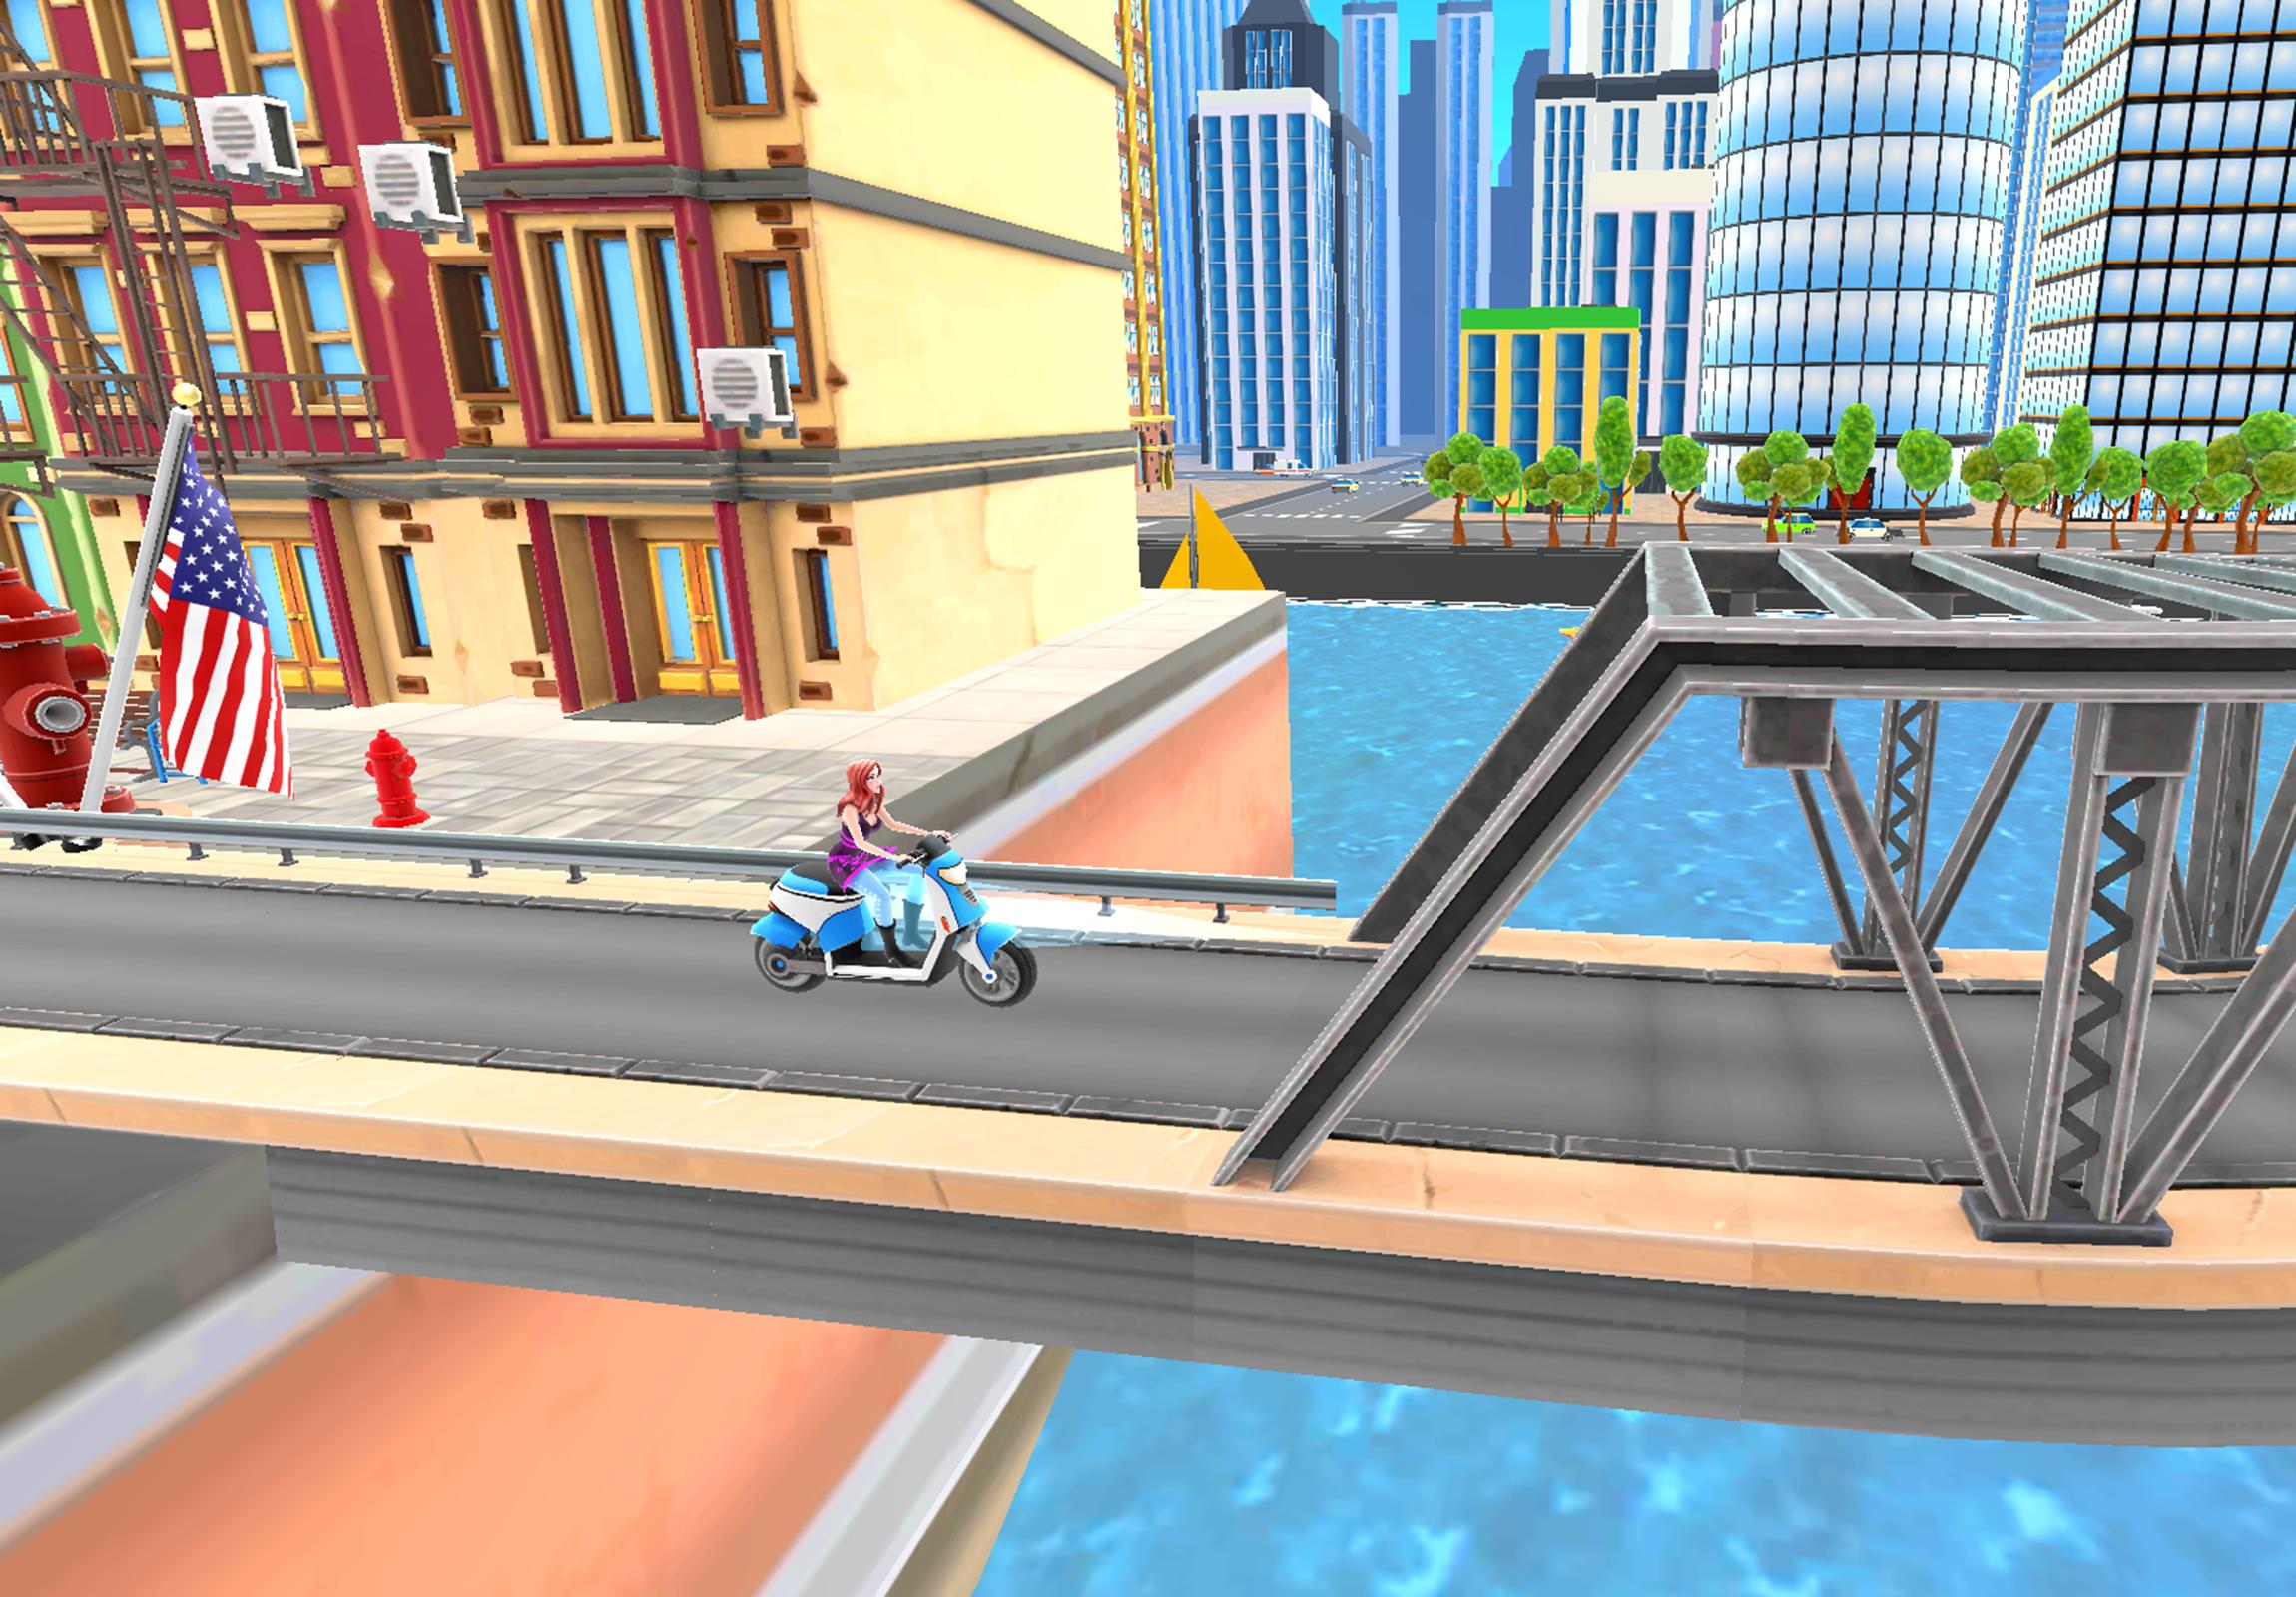 Uphill Rush 2 USA Racing for Android - APK Download2300 x 1600